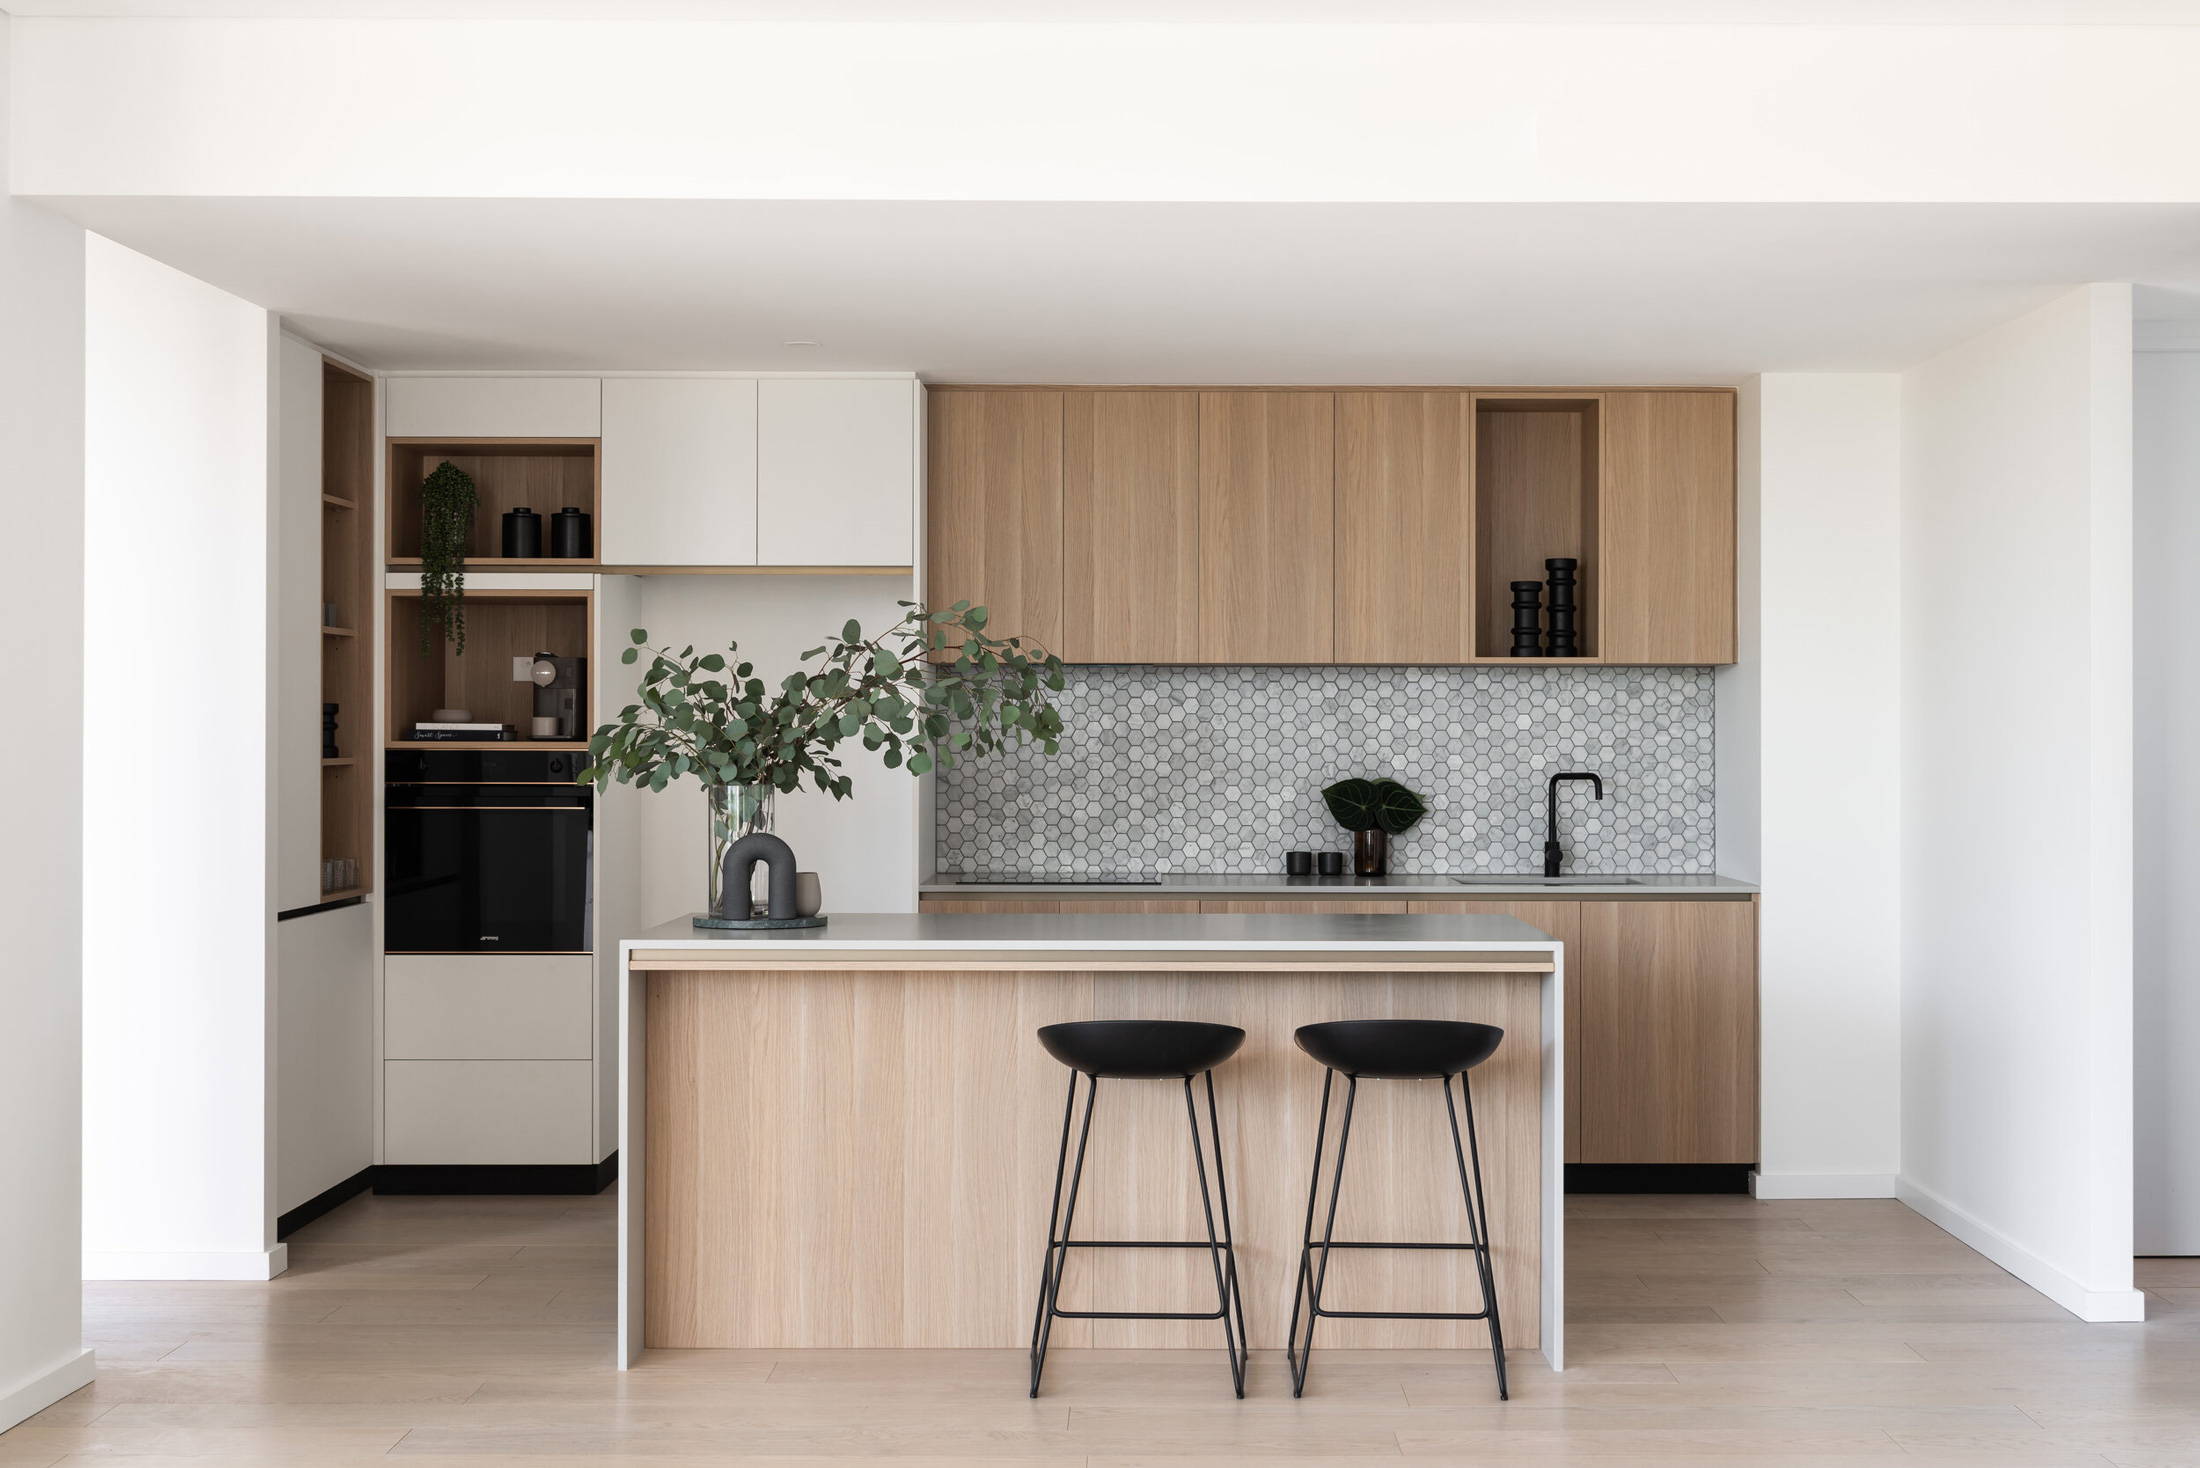 Kitchen at Treehouse Apartments in Jolimont